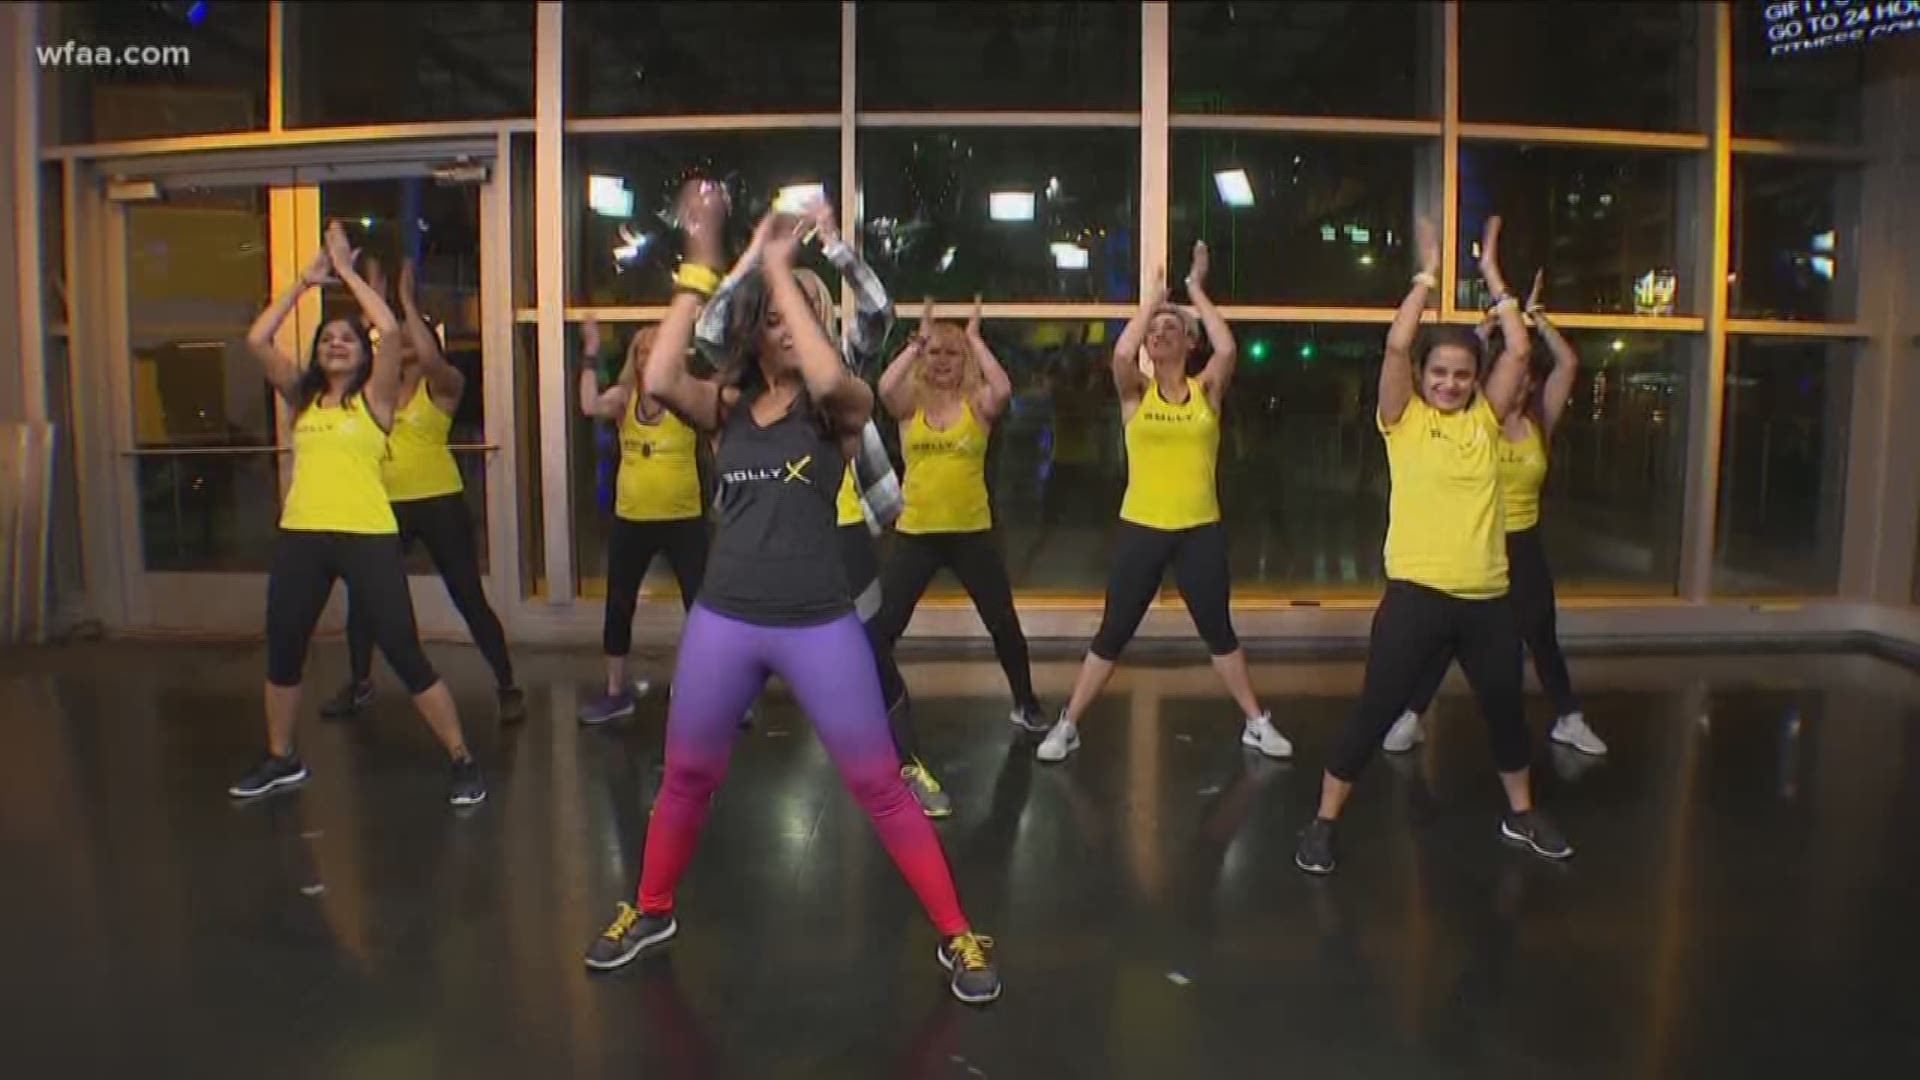 We're taking you to a workout trend taking over the country. Bollywood-style dance moves combine with workout steps to help you burn those calories.